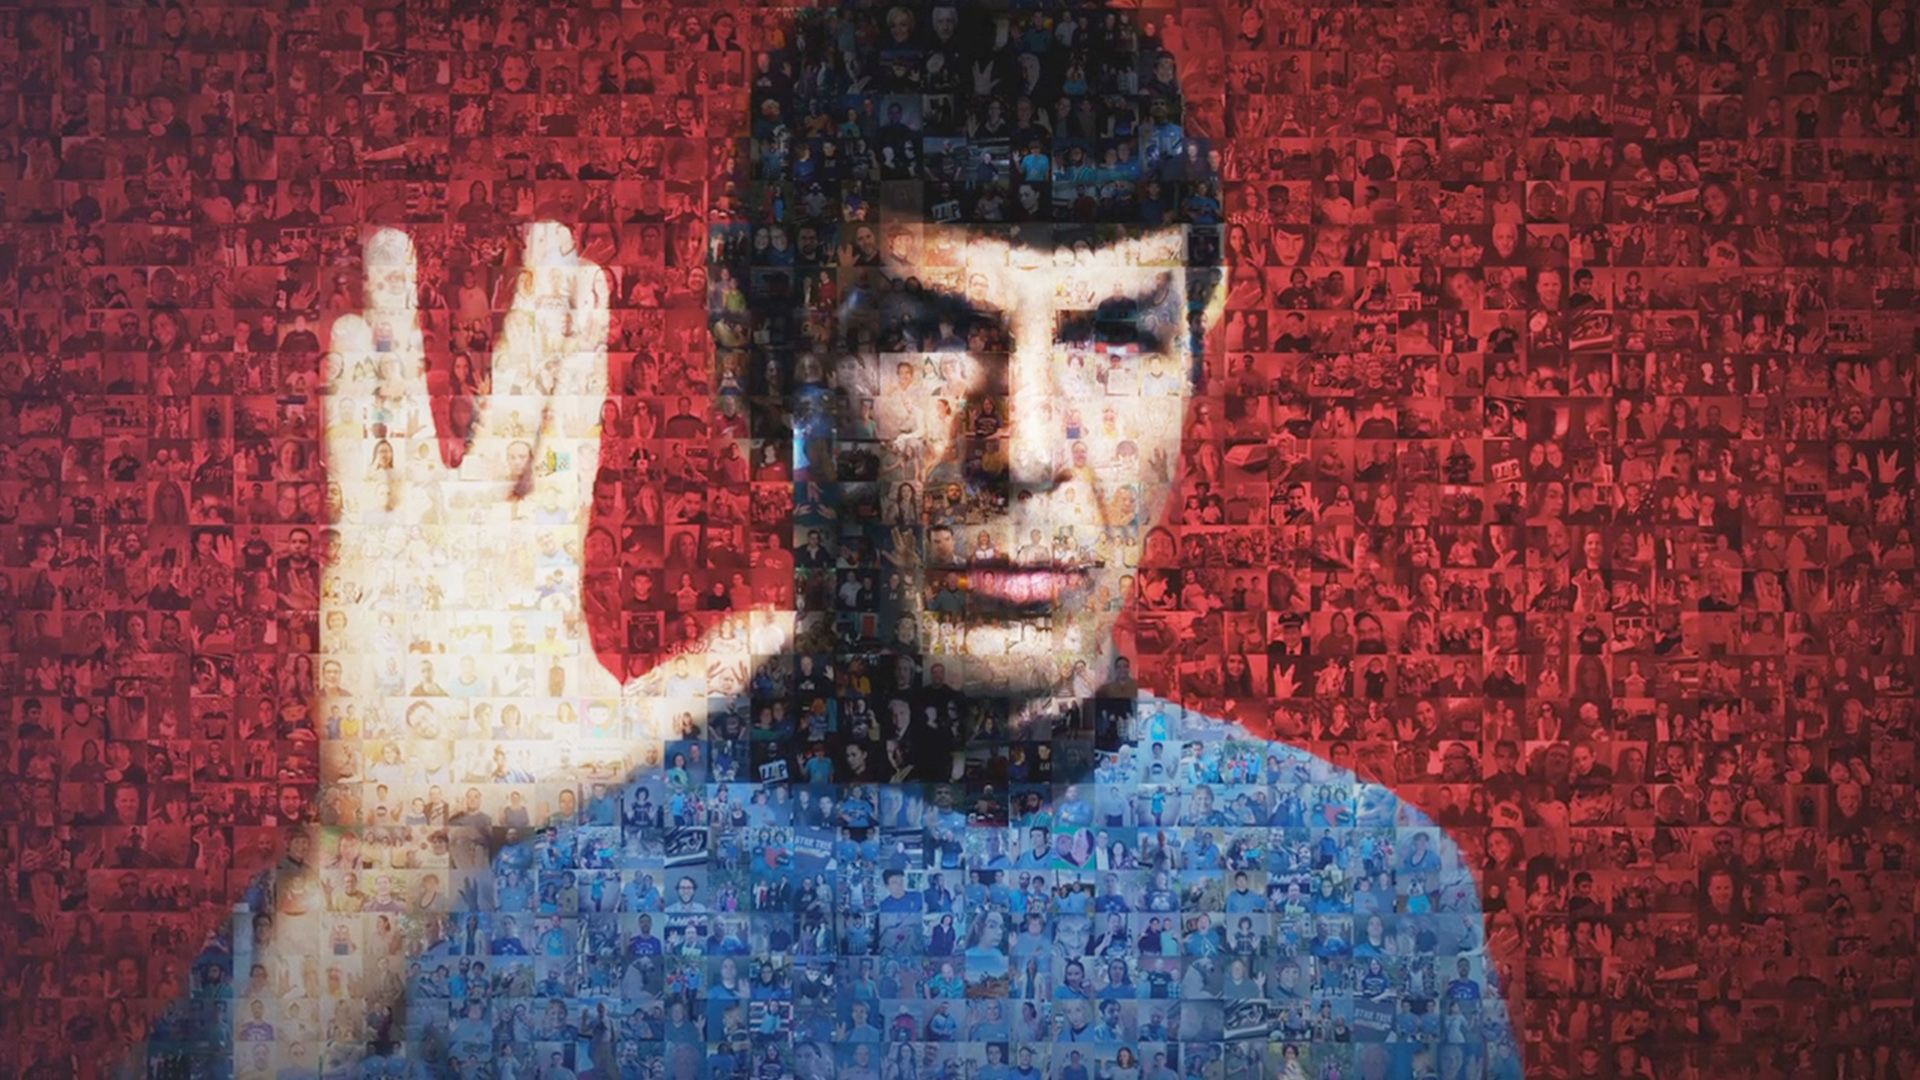 For the Love of Spock background